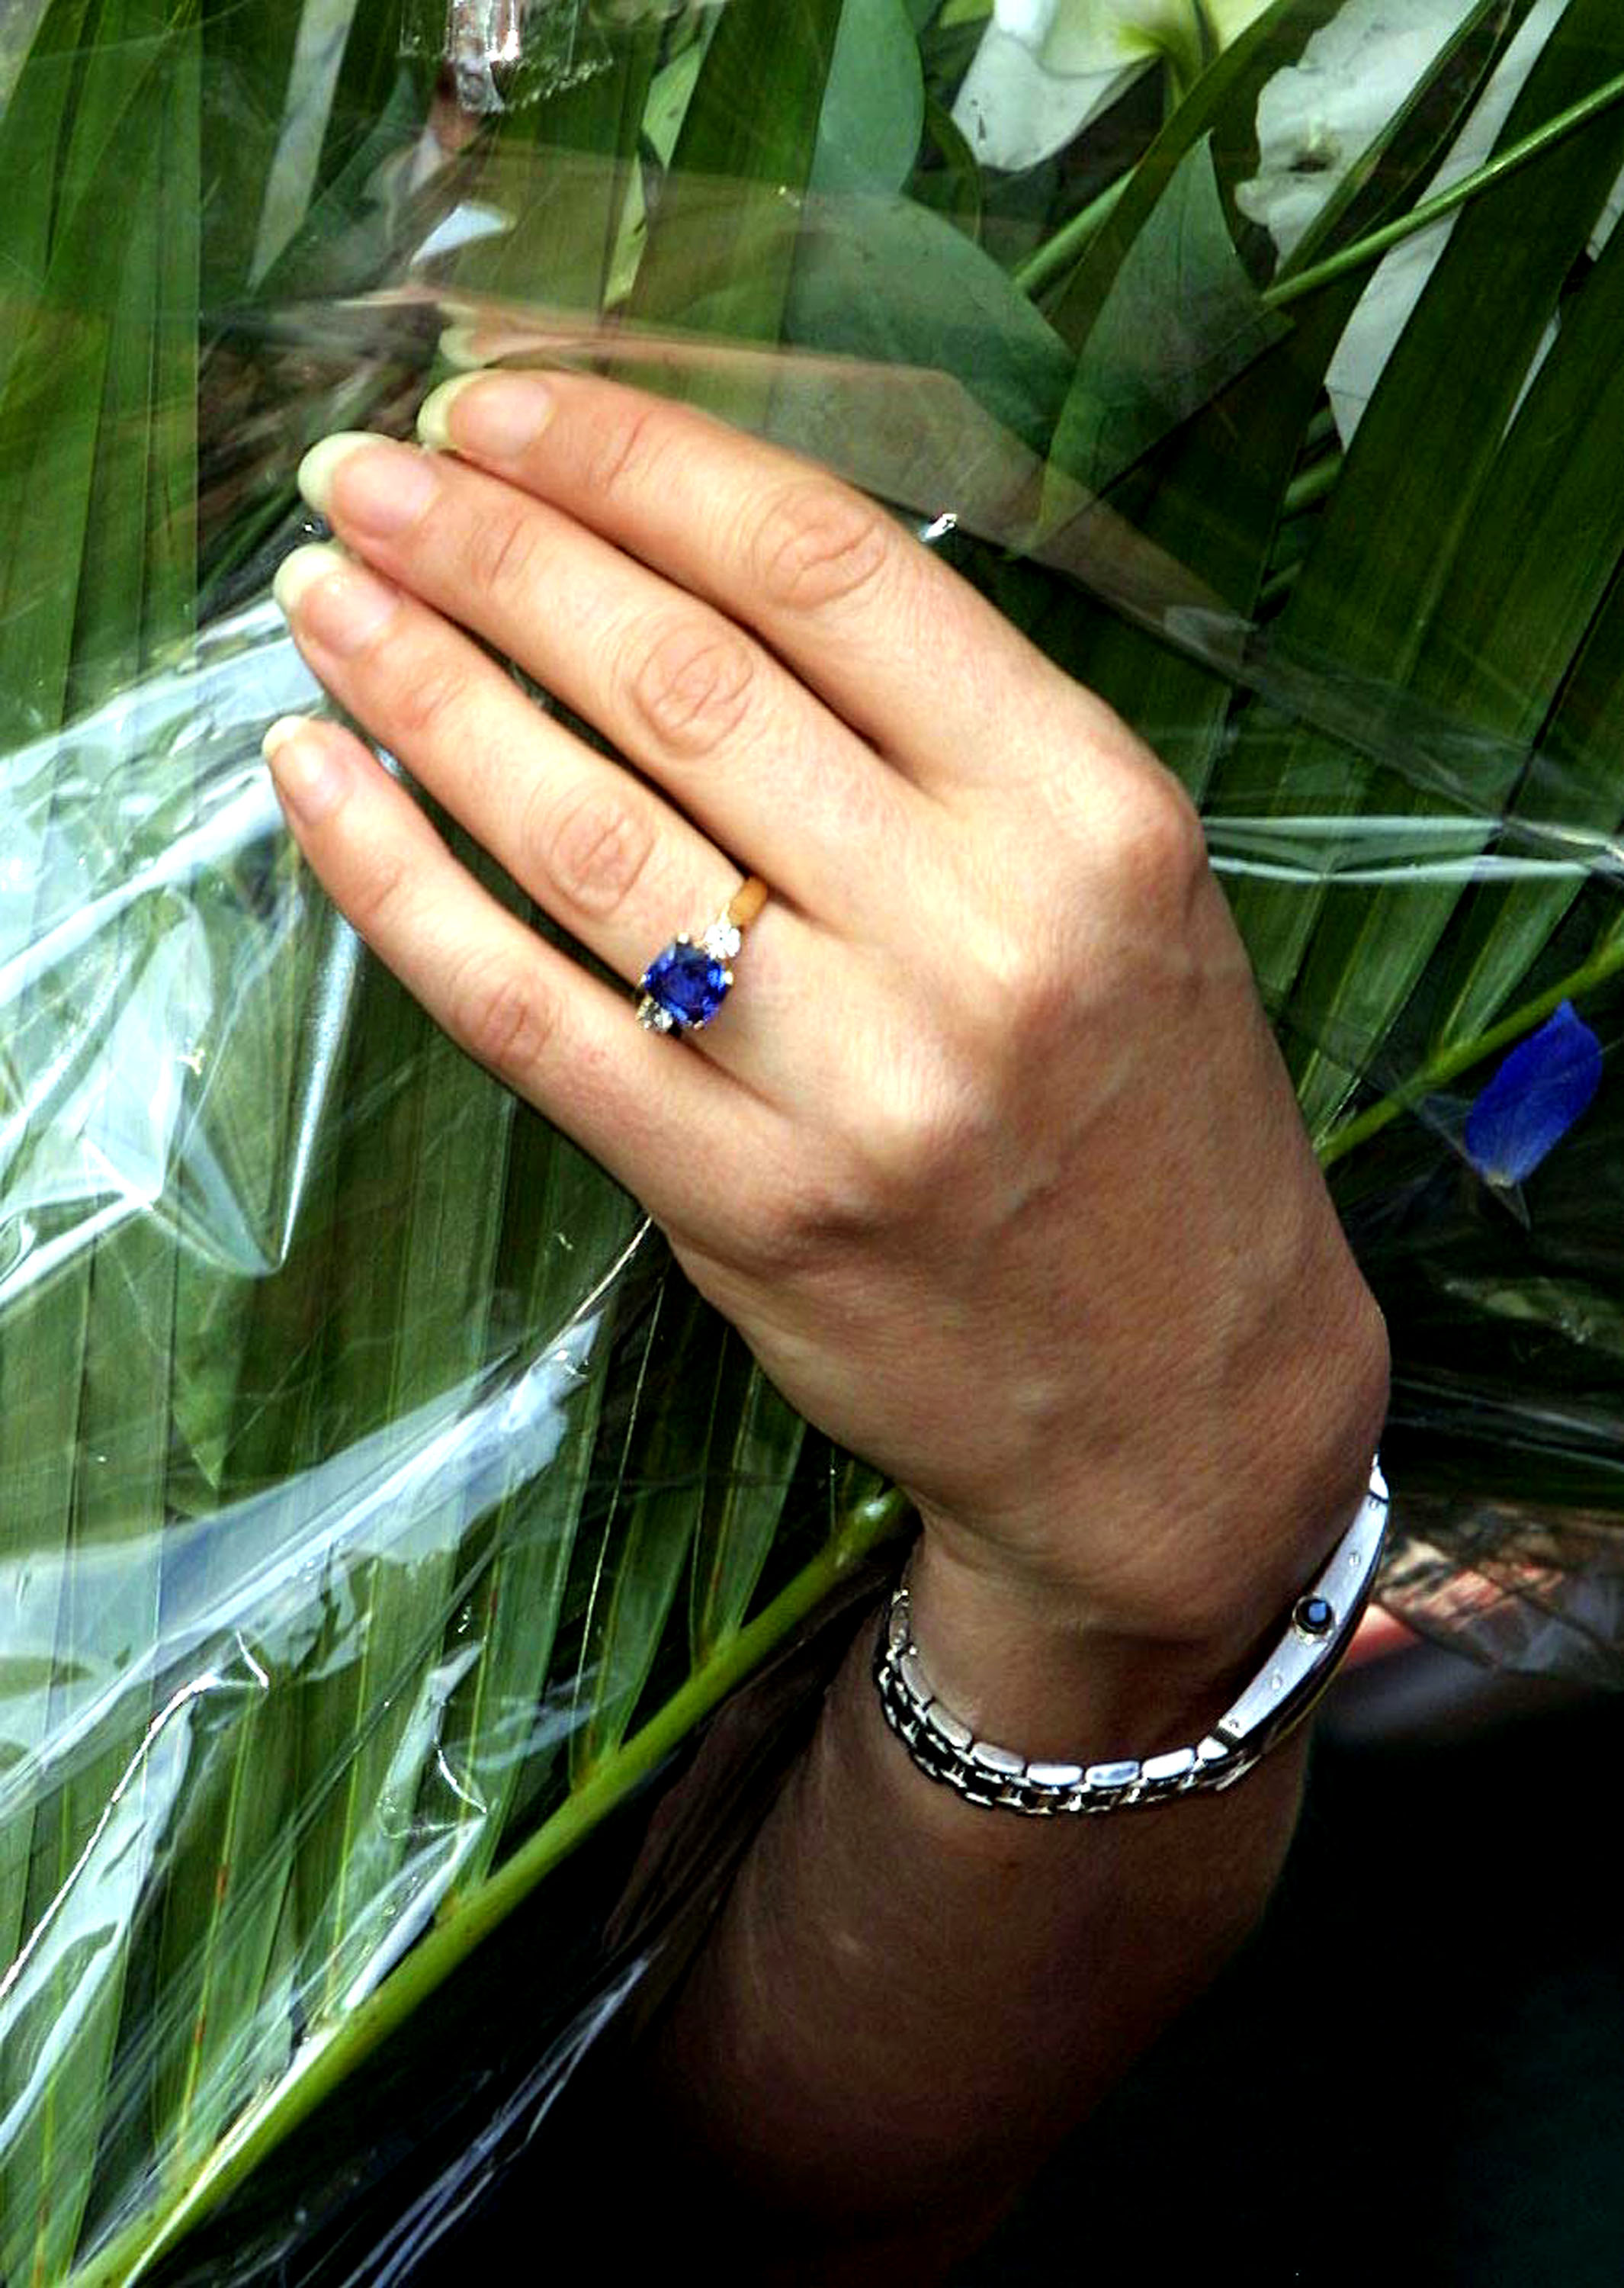 Heather Mills photographed with her engagement ring in London in 2001 | Source: Getty Images